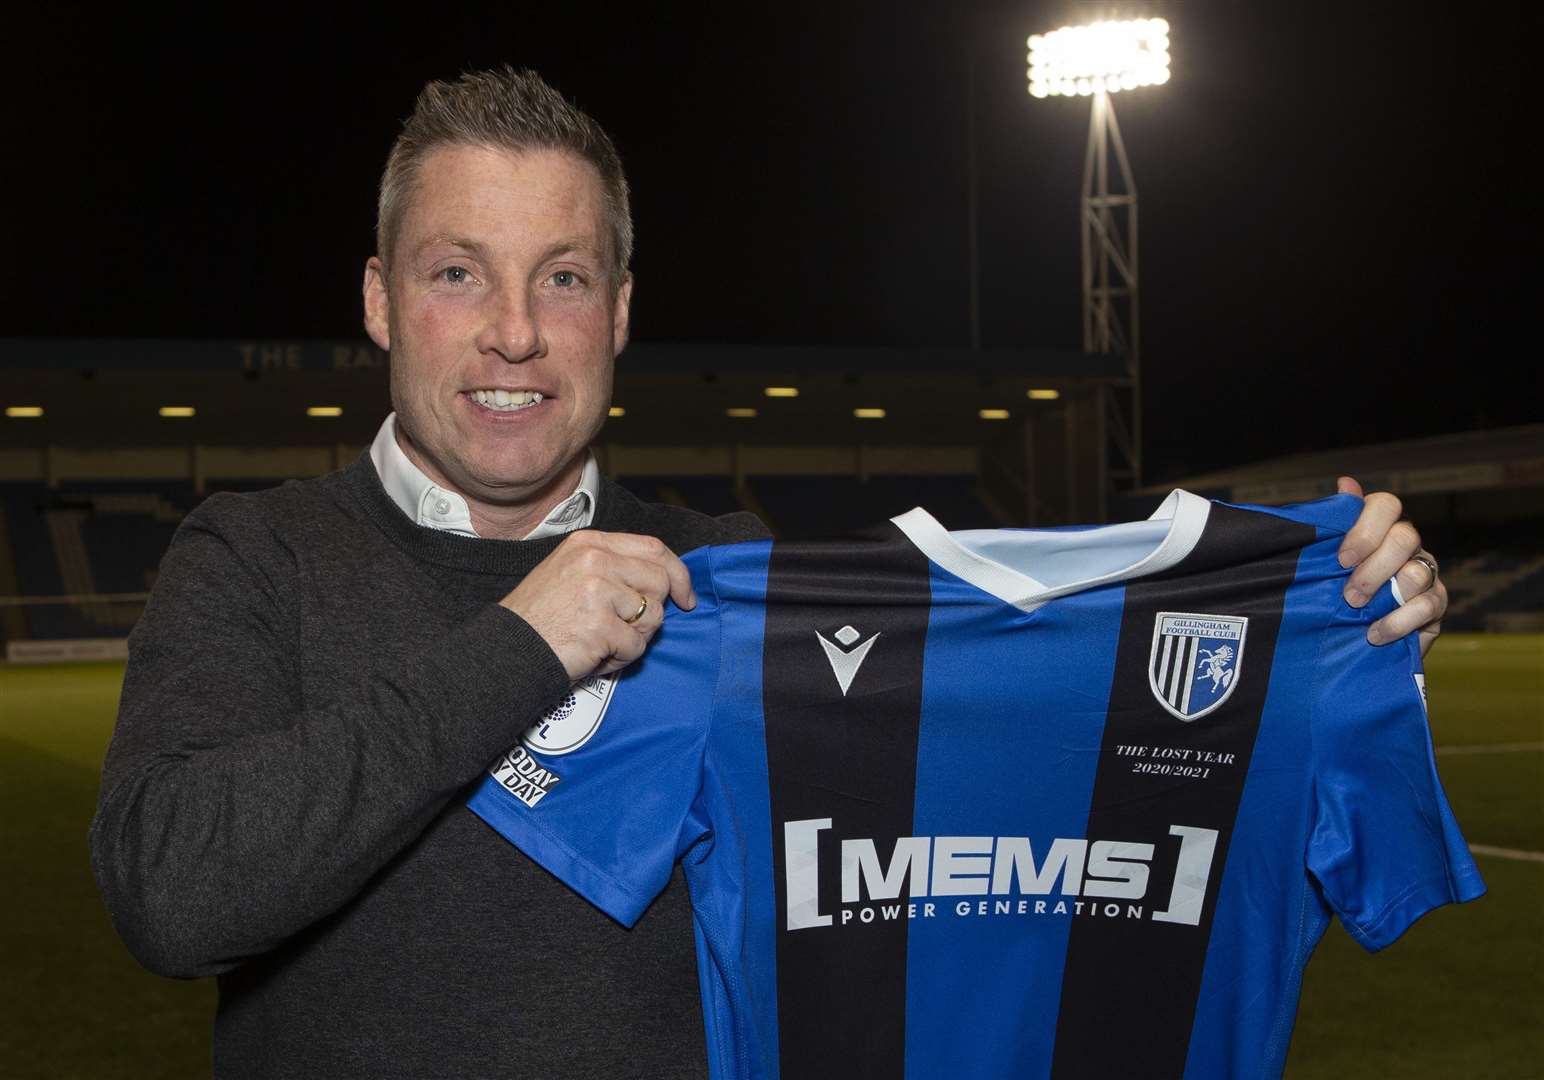 Neil Harris was announced as Steve Evans’ replacement, the former Gills striker signing a two-and-a-half year deal